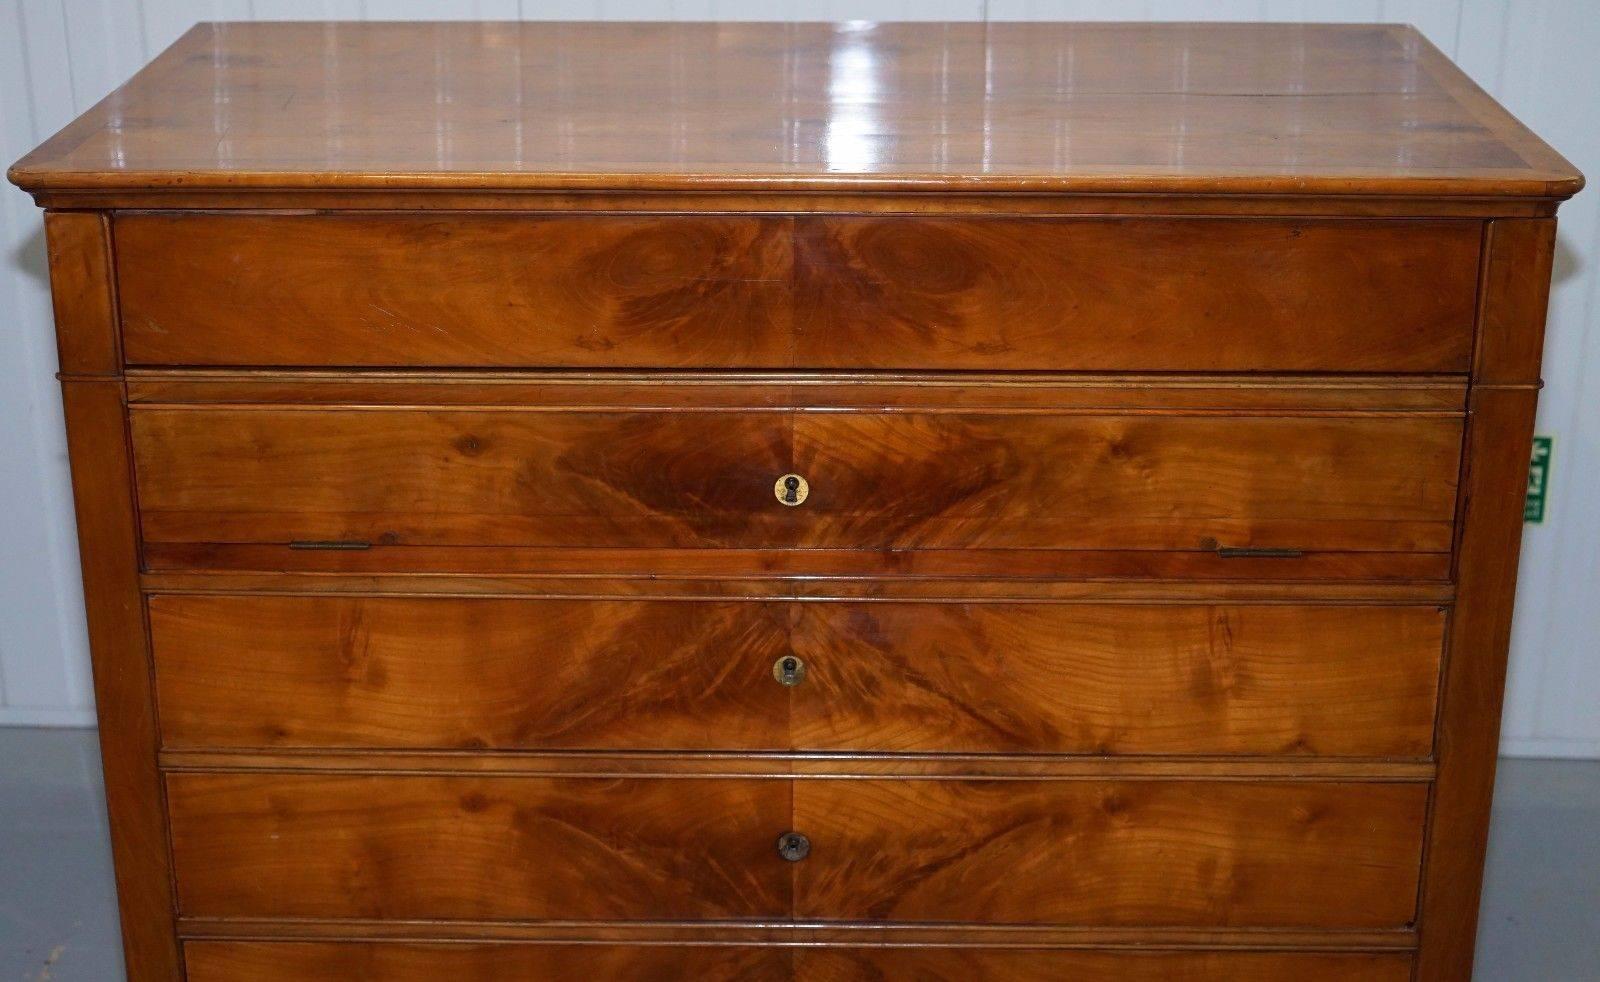 Mid-19th Century Rare 1840 German Biedermeier Cherrywood Chest of Drawers Commode Marble Inside